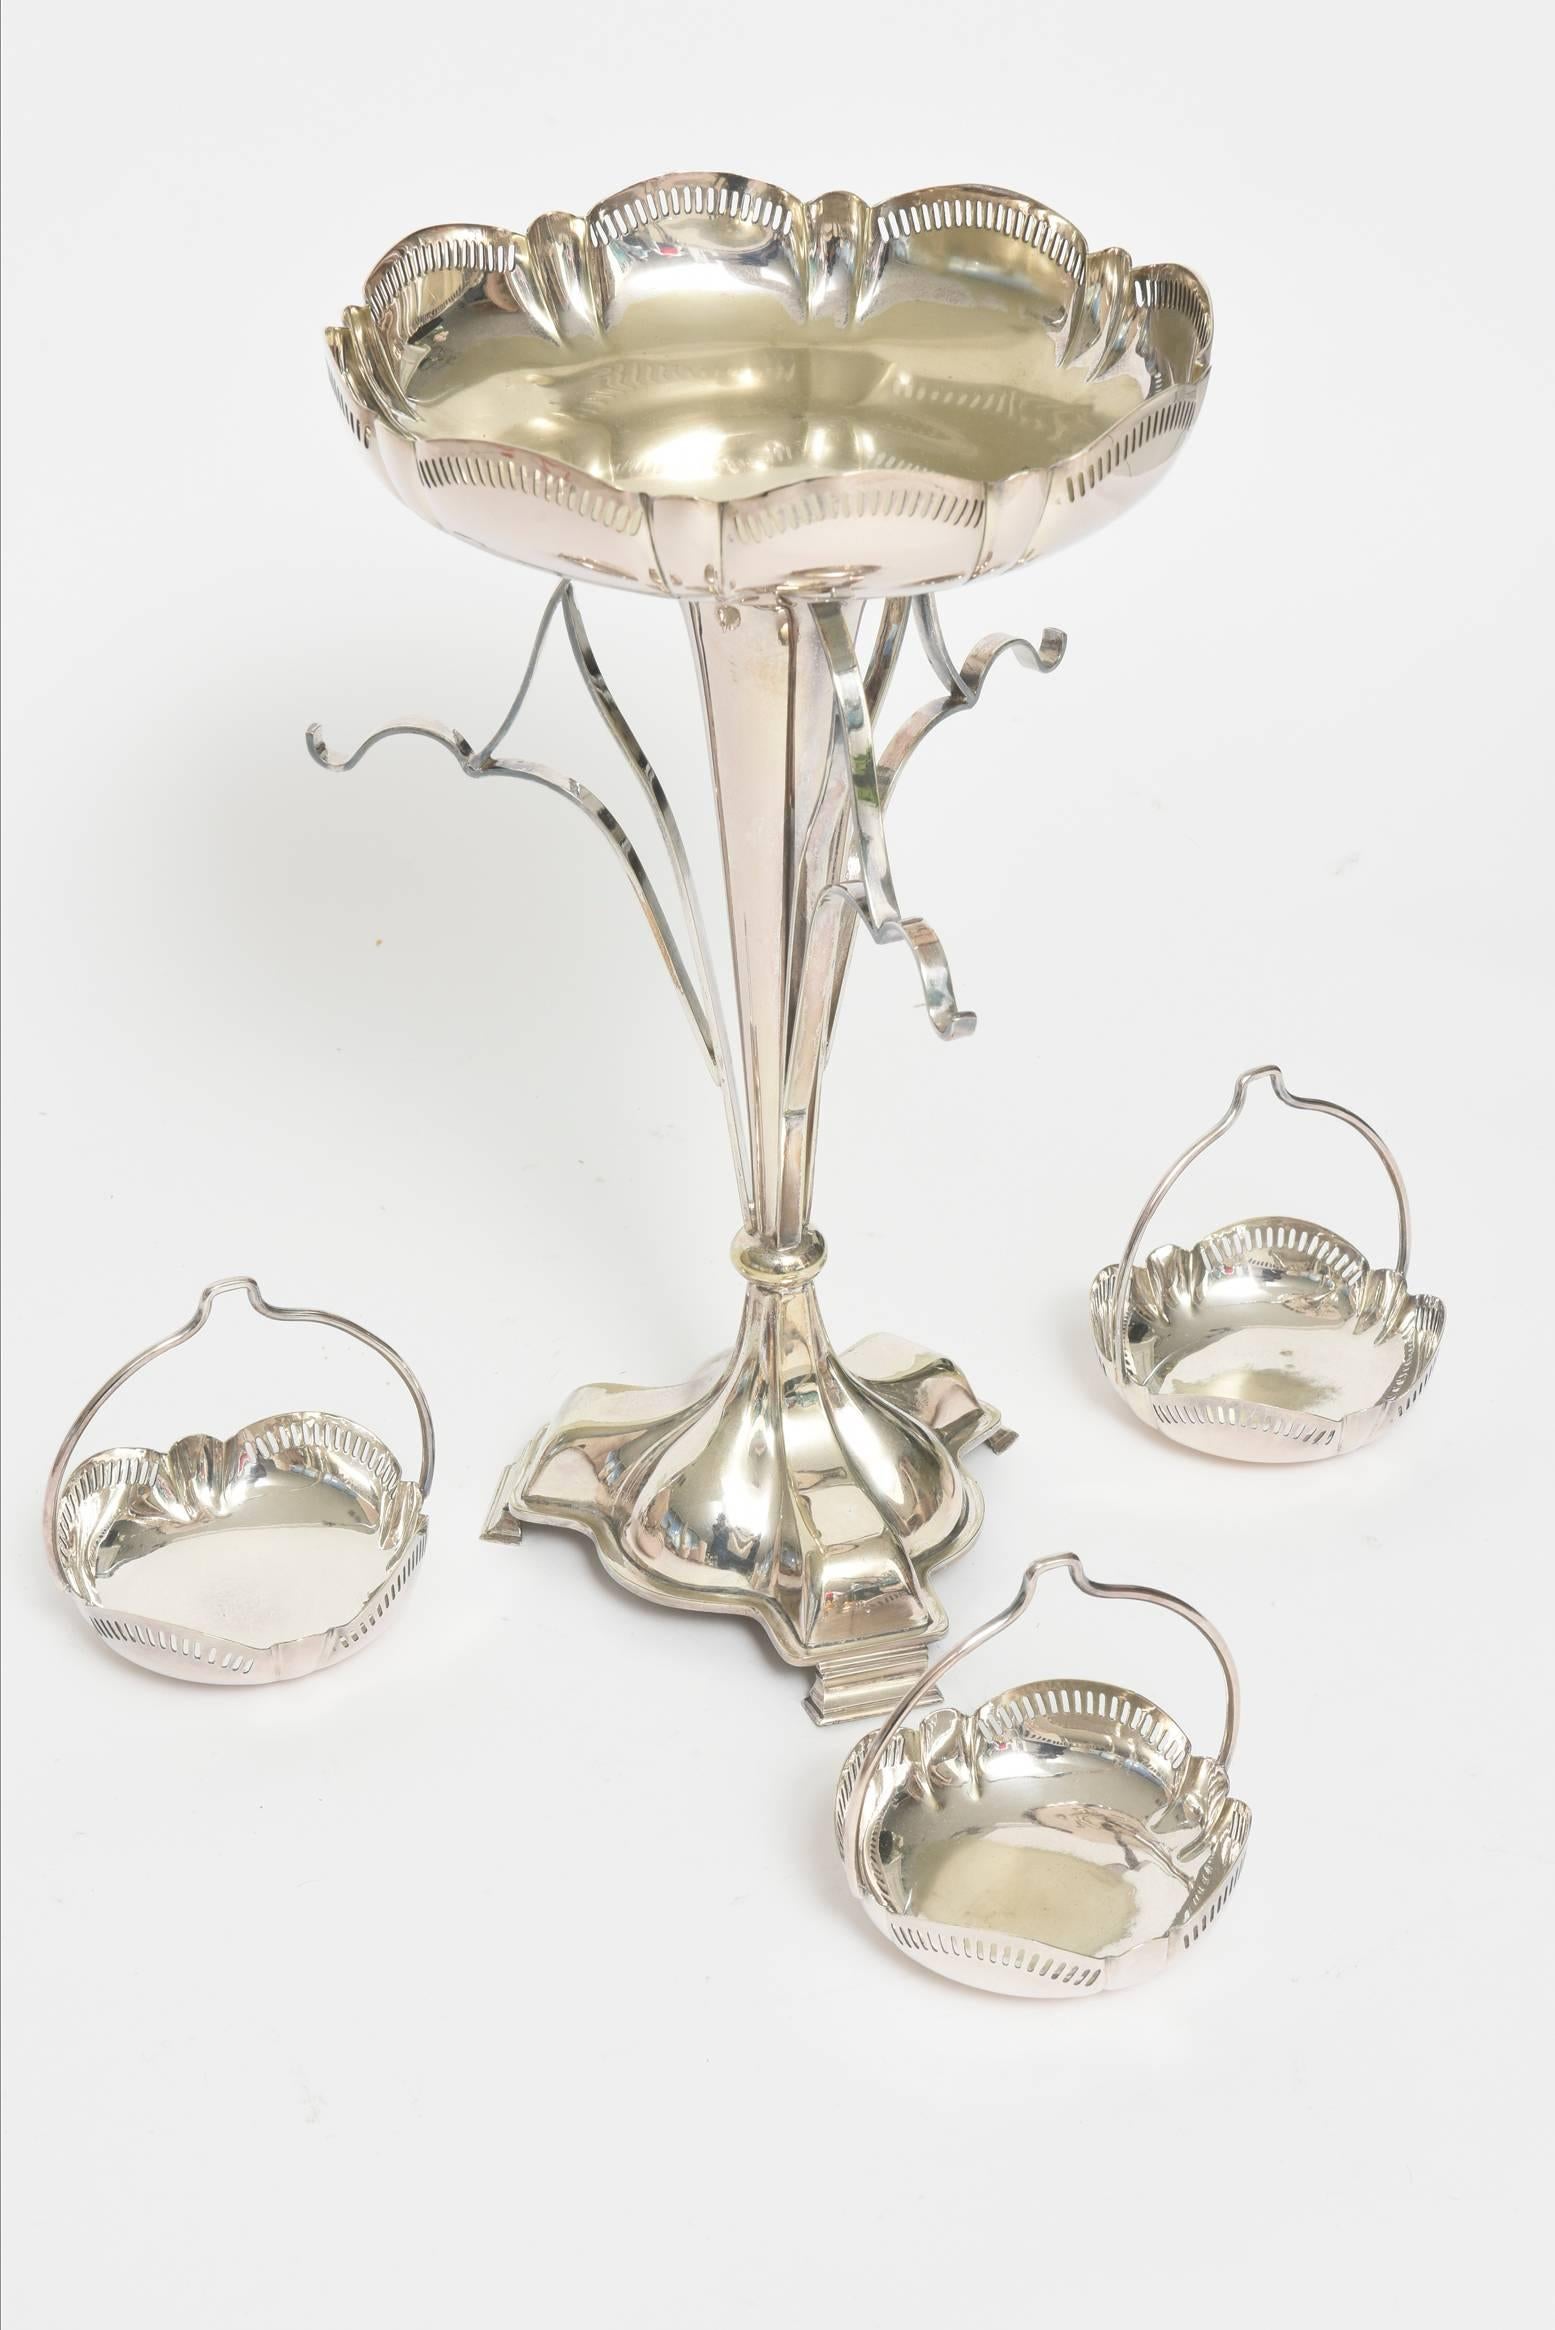 20th Century Antique Edwardian Silver Plate Epergne Centerpiece with Candy and Sweets Baskets